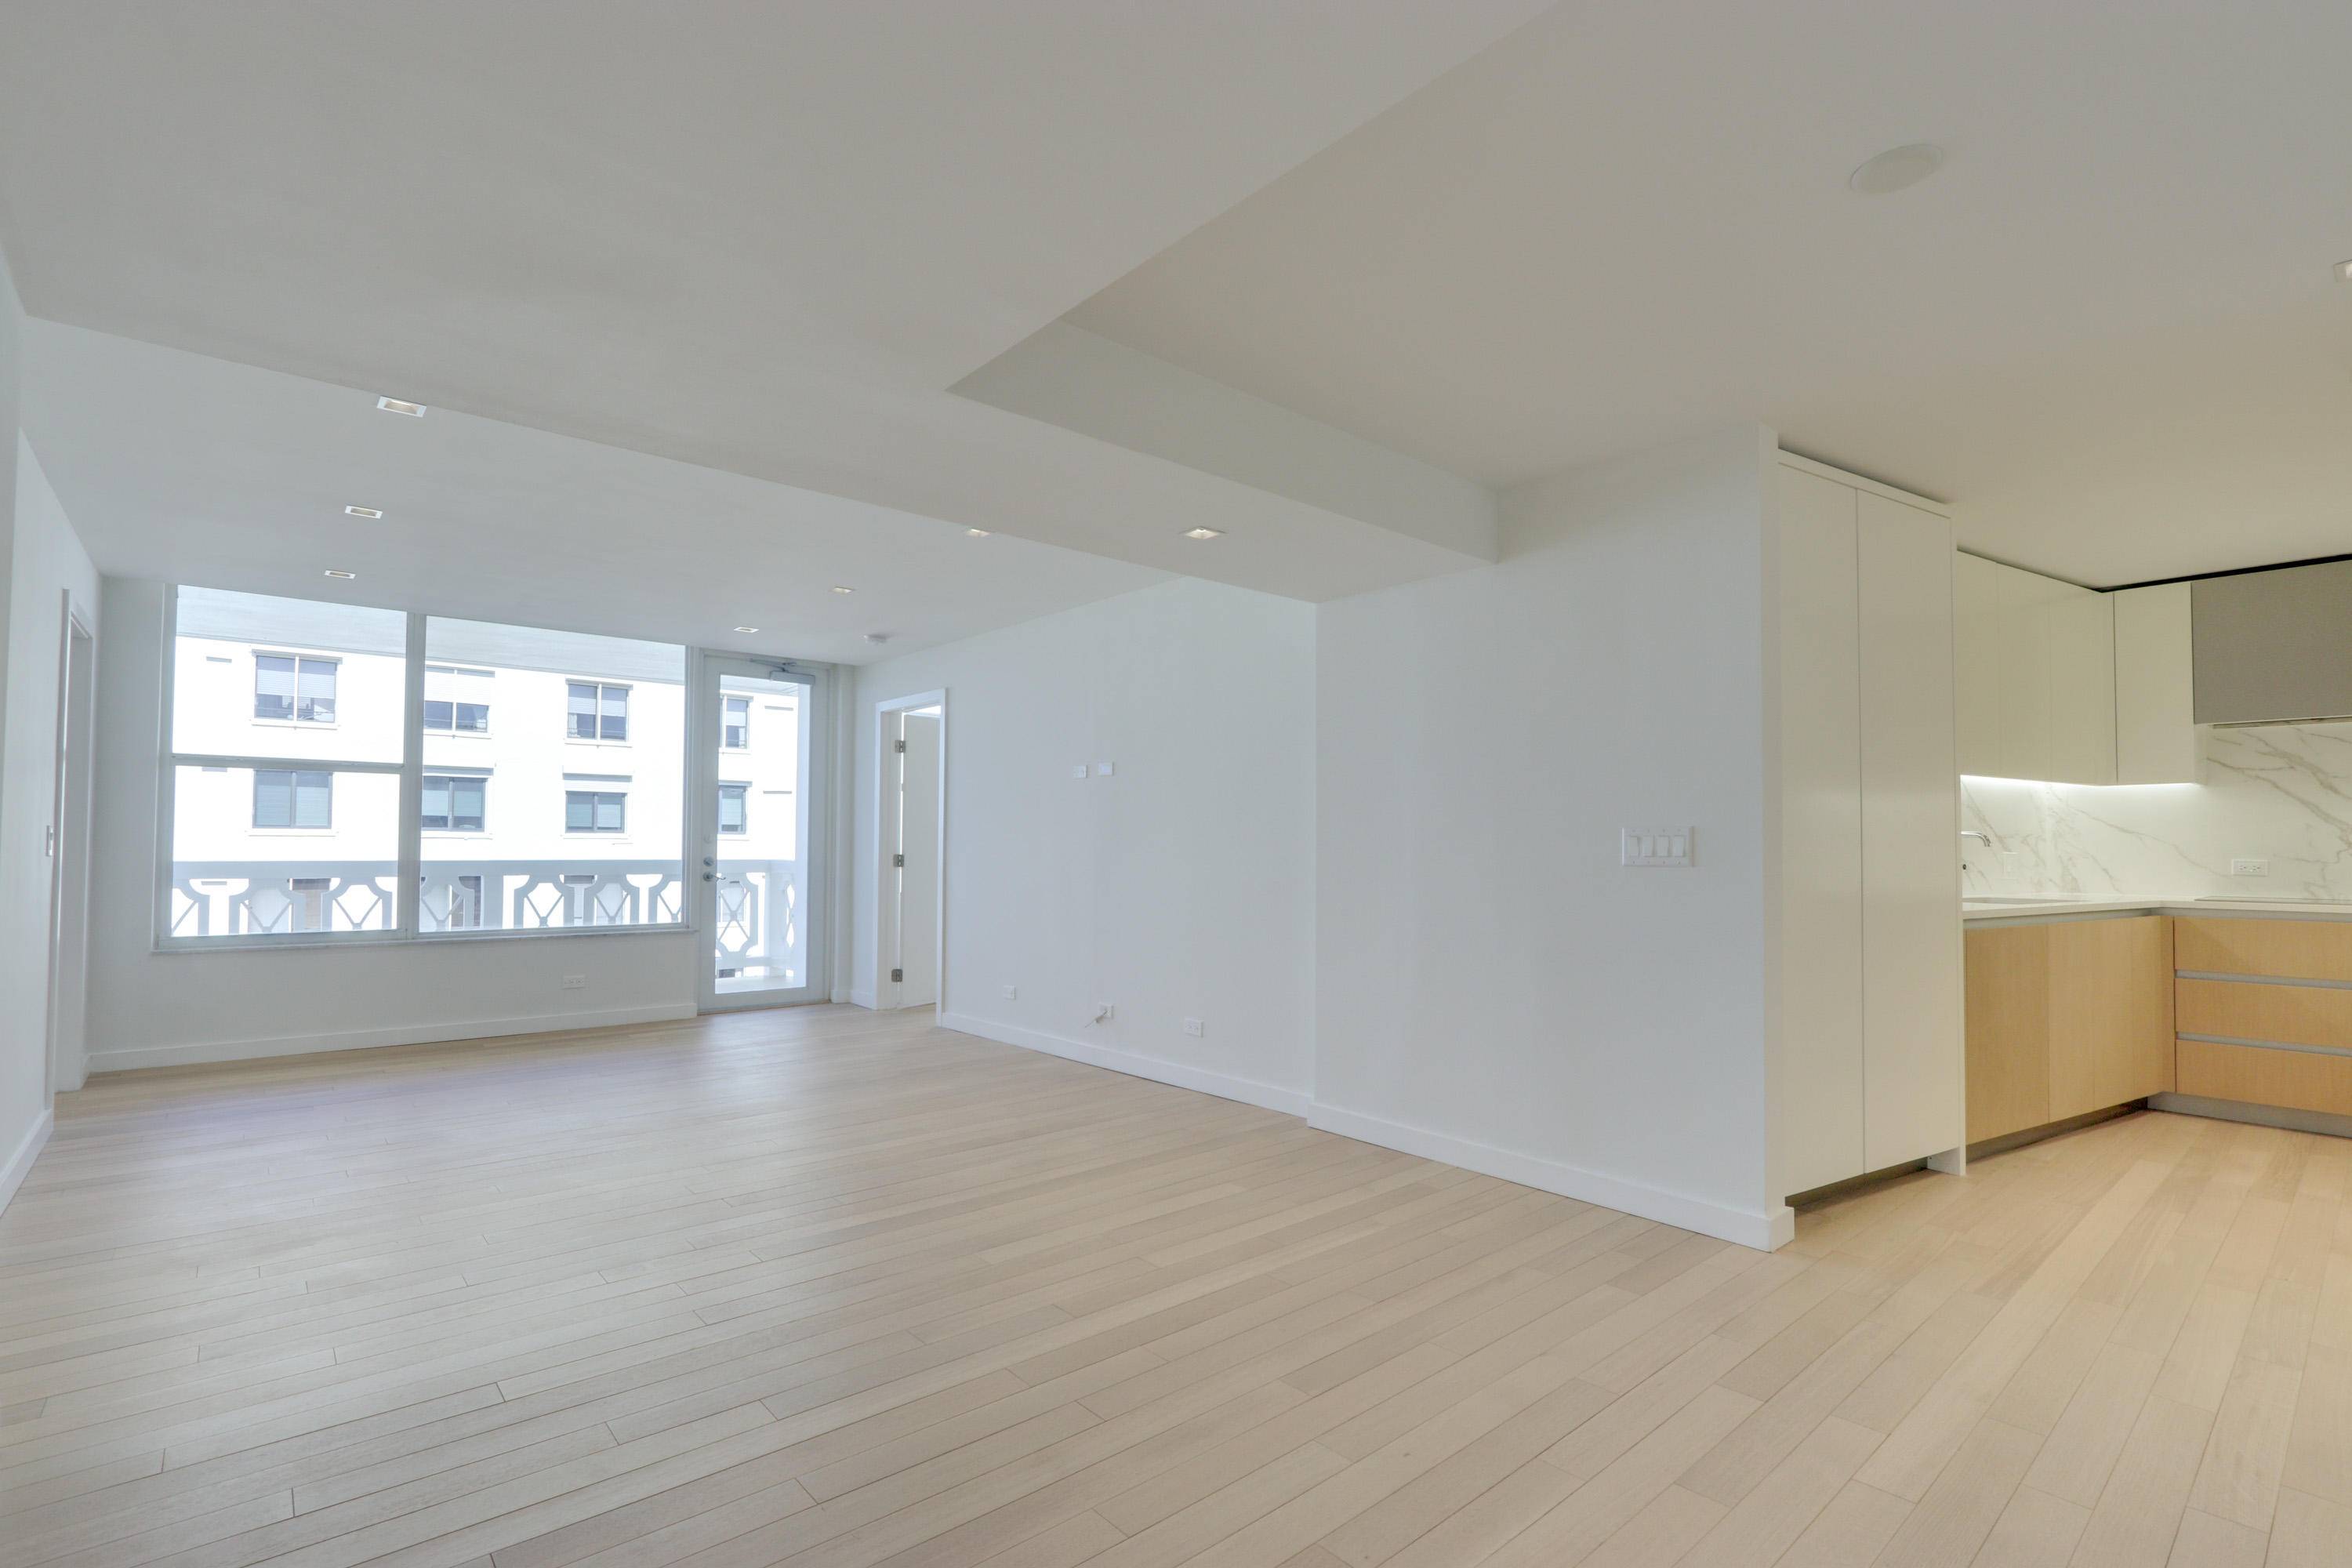 This Junior 2 2 is one of a limited collection of residences available in this newly renovated property which will deliver an exceptional level of quality finishes featuring 12x24 honed ...